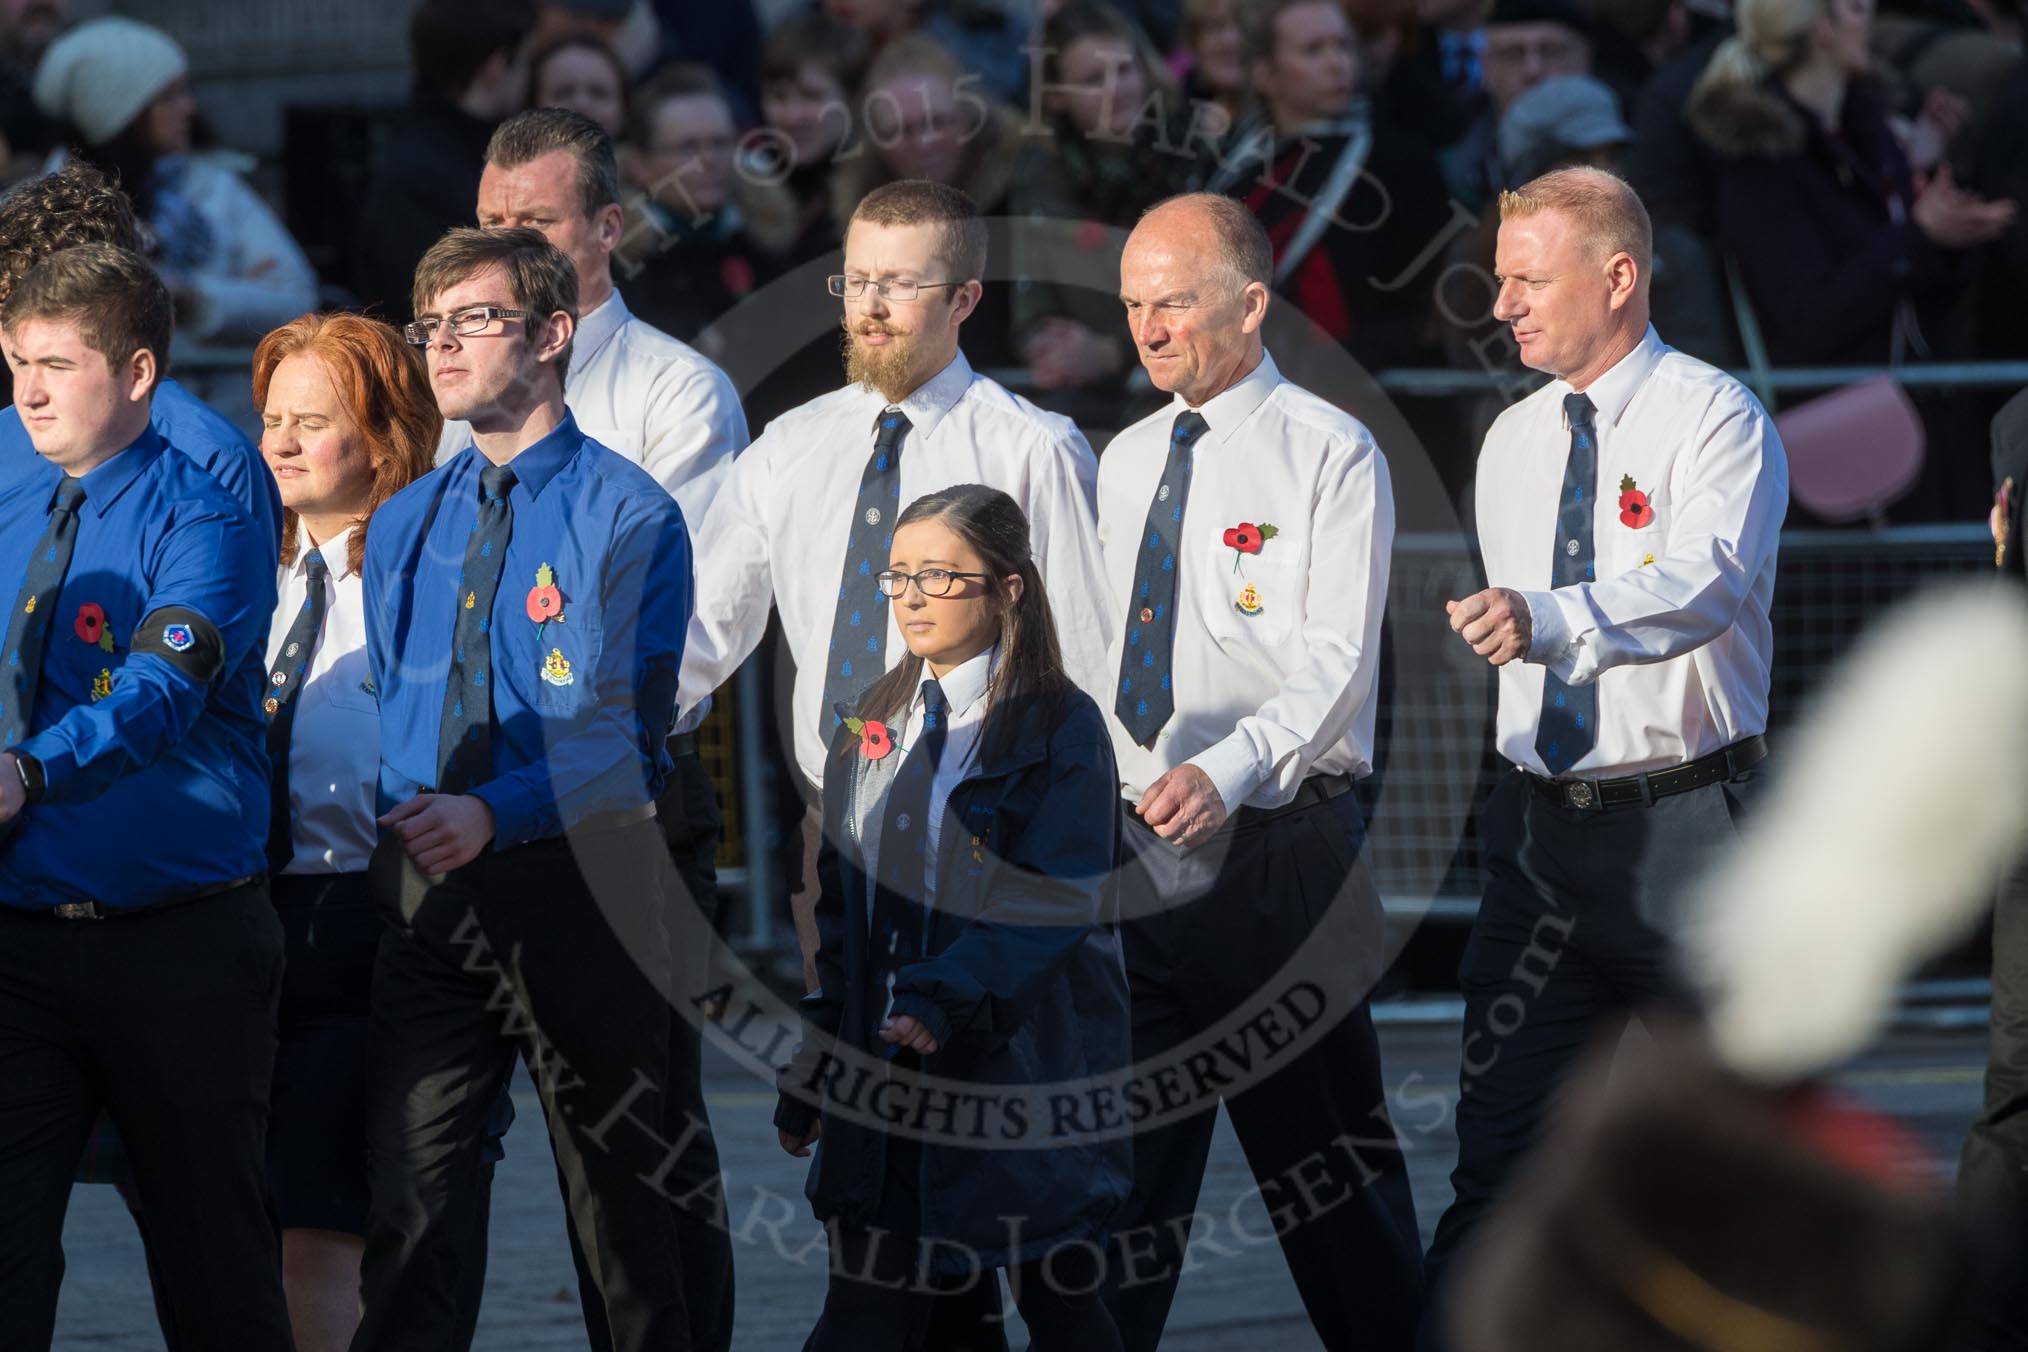 March Past, Remembrance Sunday at the Cenotaph 2016: M51 RSPCA.
Cenotaph, Whitehall, London SW1,
London,
Greater London,
United Kingdom,
on 13 November 2016 at 13:20, image #3050